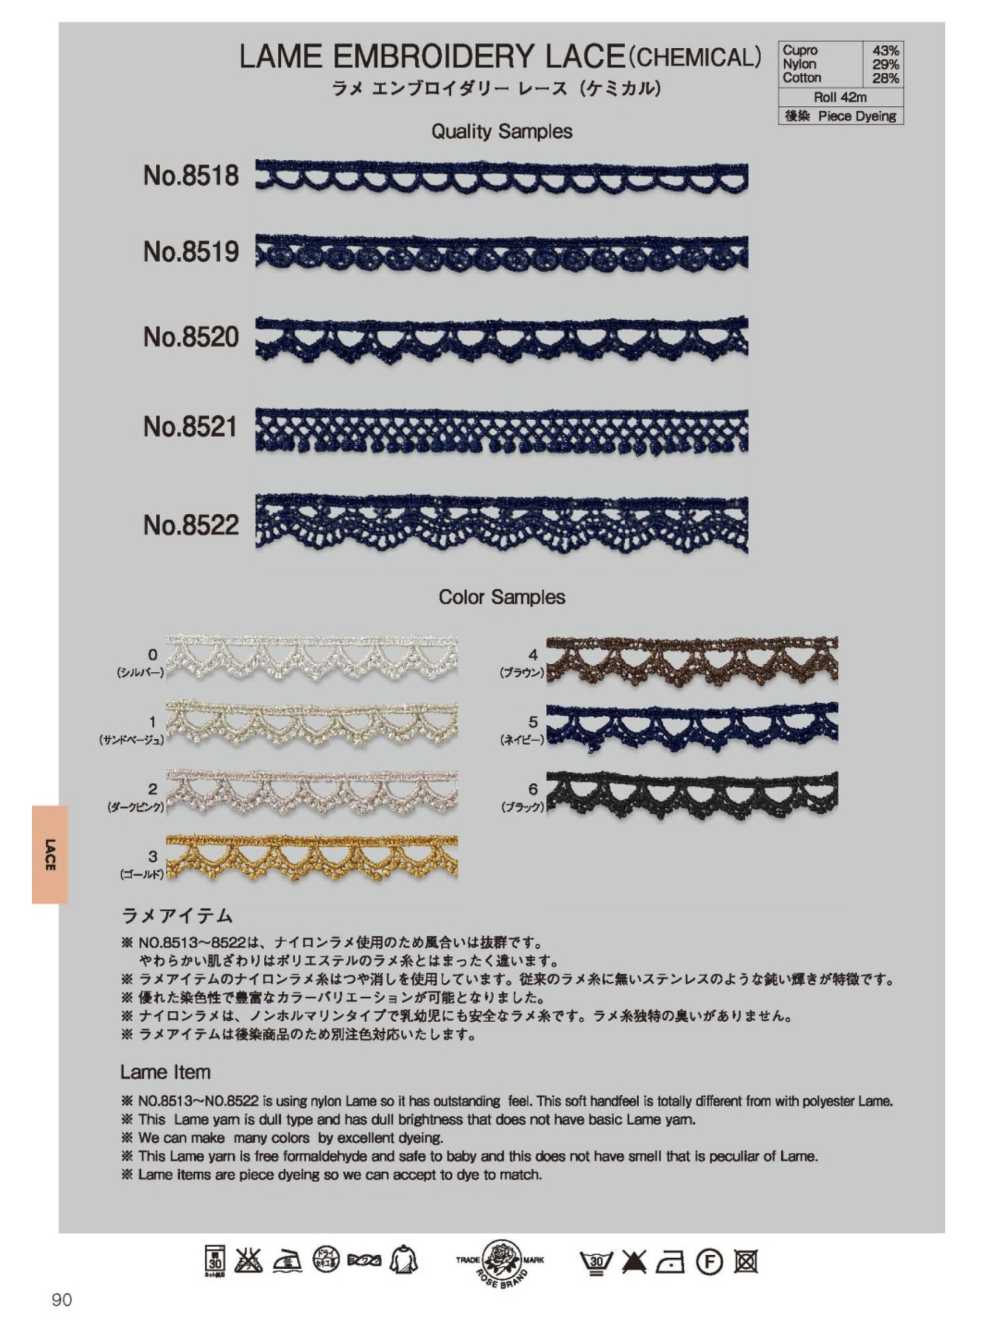 8519 Lame Embroidered Lace(Chemical) ROSE BRAND (Marushin)